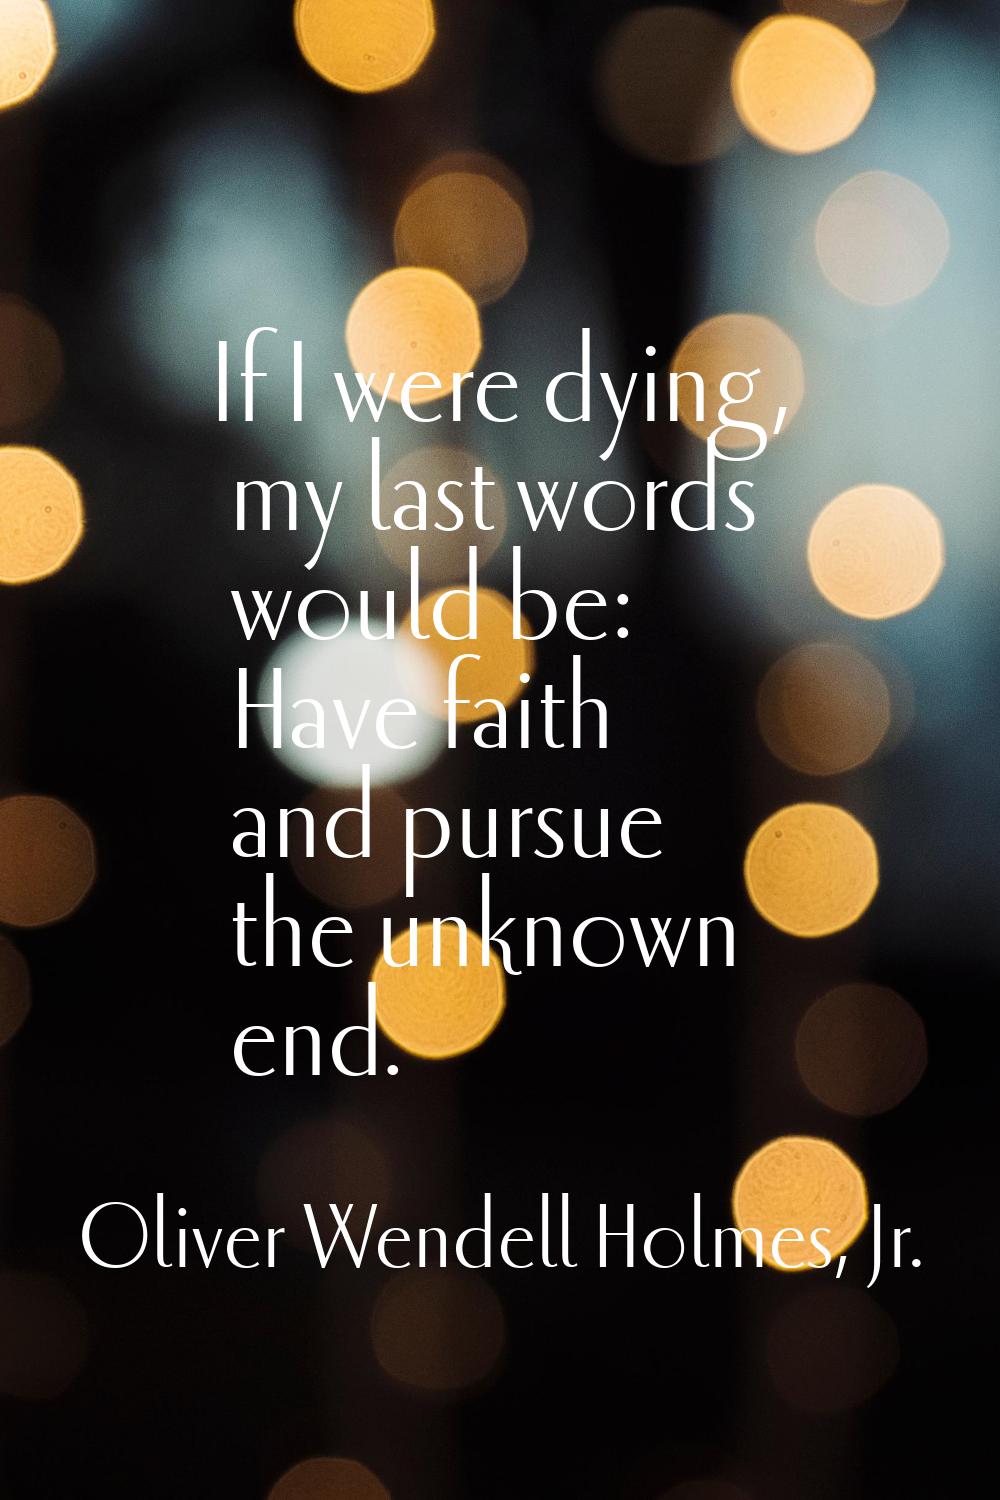 If I were dying, my last words would be: Have faith and pursue the unknown end.